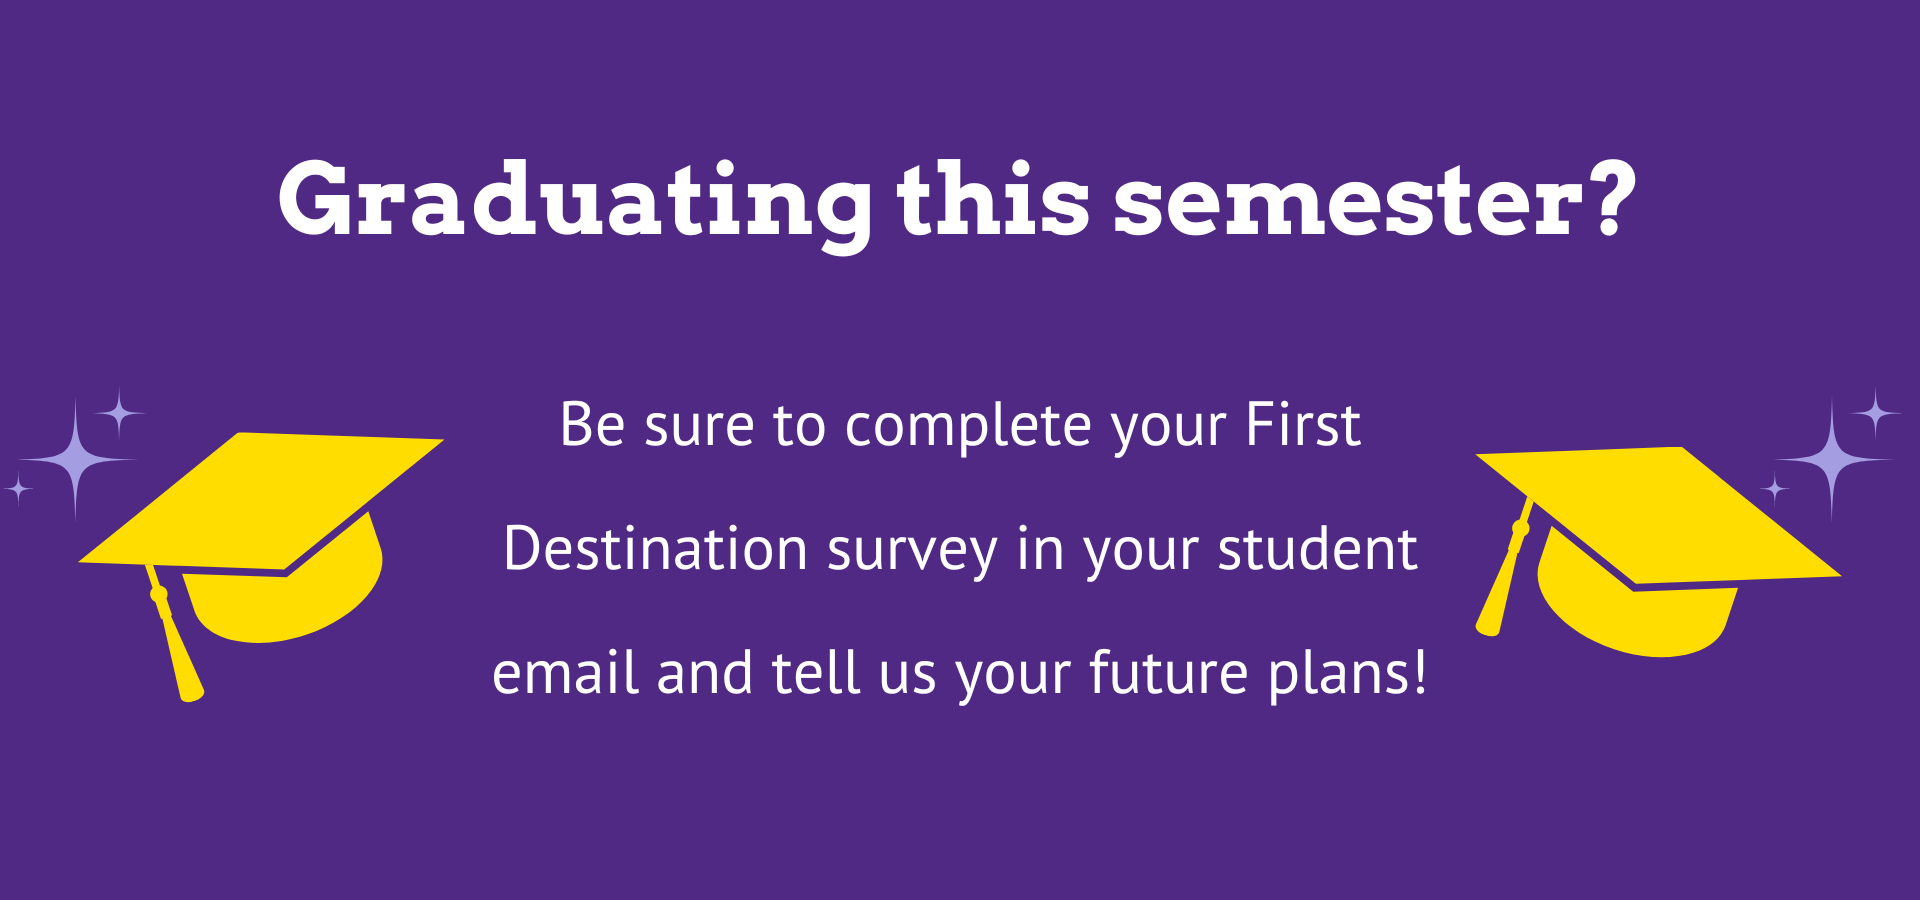 Complete your first destination survey in your student email and tell us your future plans